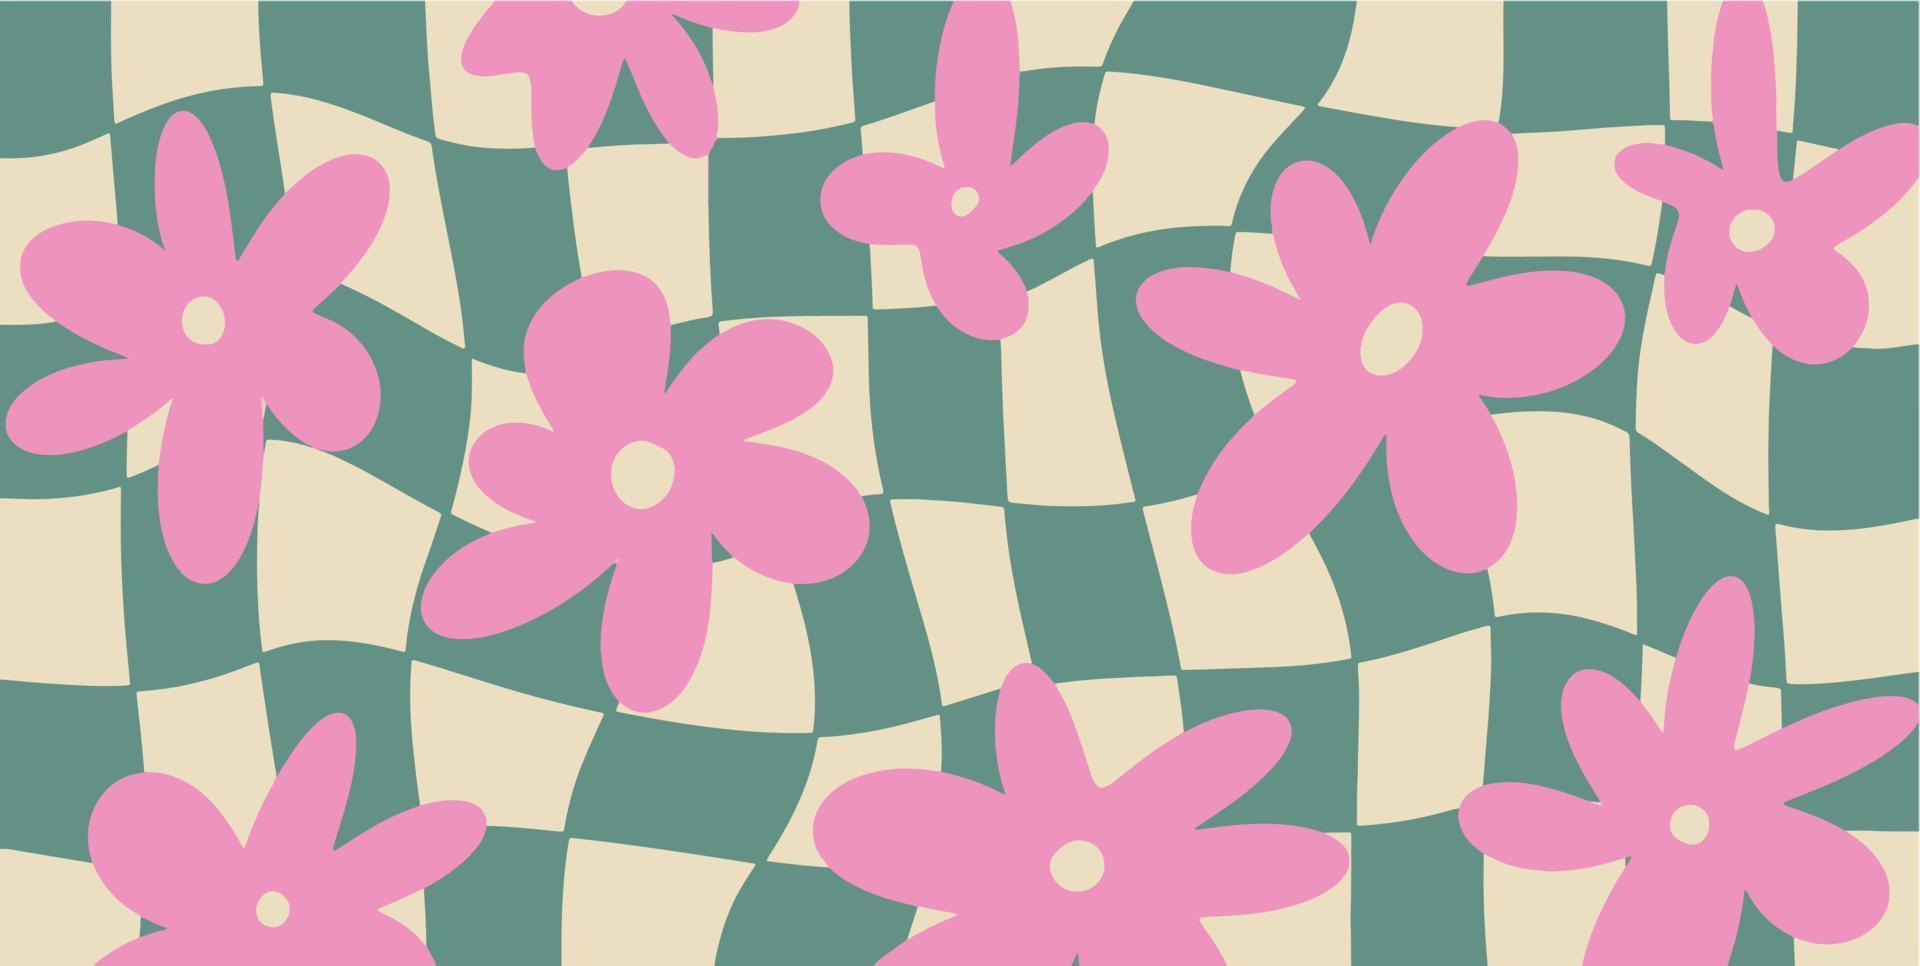 Groovy checkered Daisy Flowers background. Retro 70s Hippie Aesthetic wallpaper with Trippy distortion Grid. Vector modern Seventies Style illustration